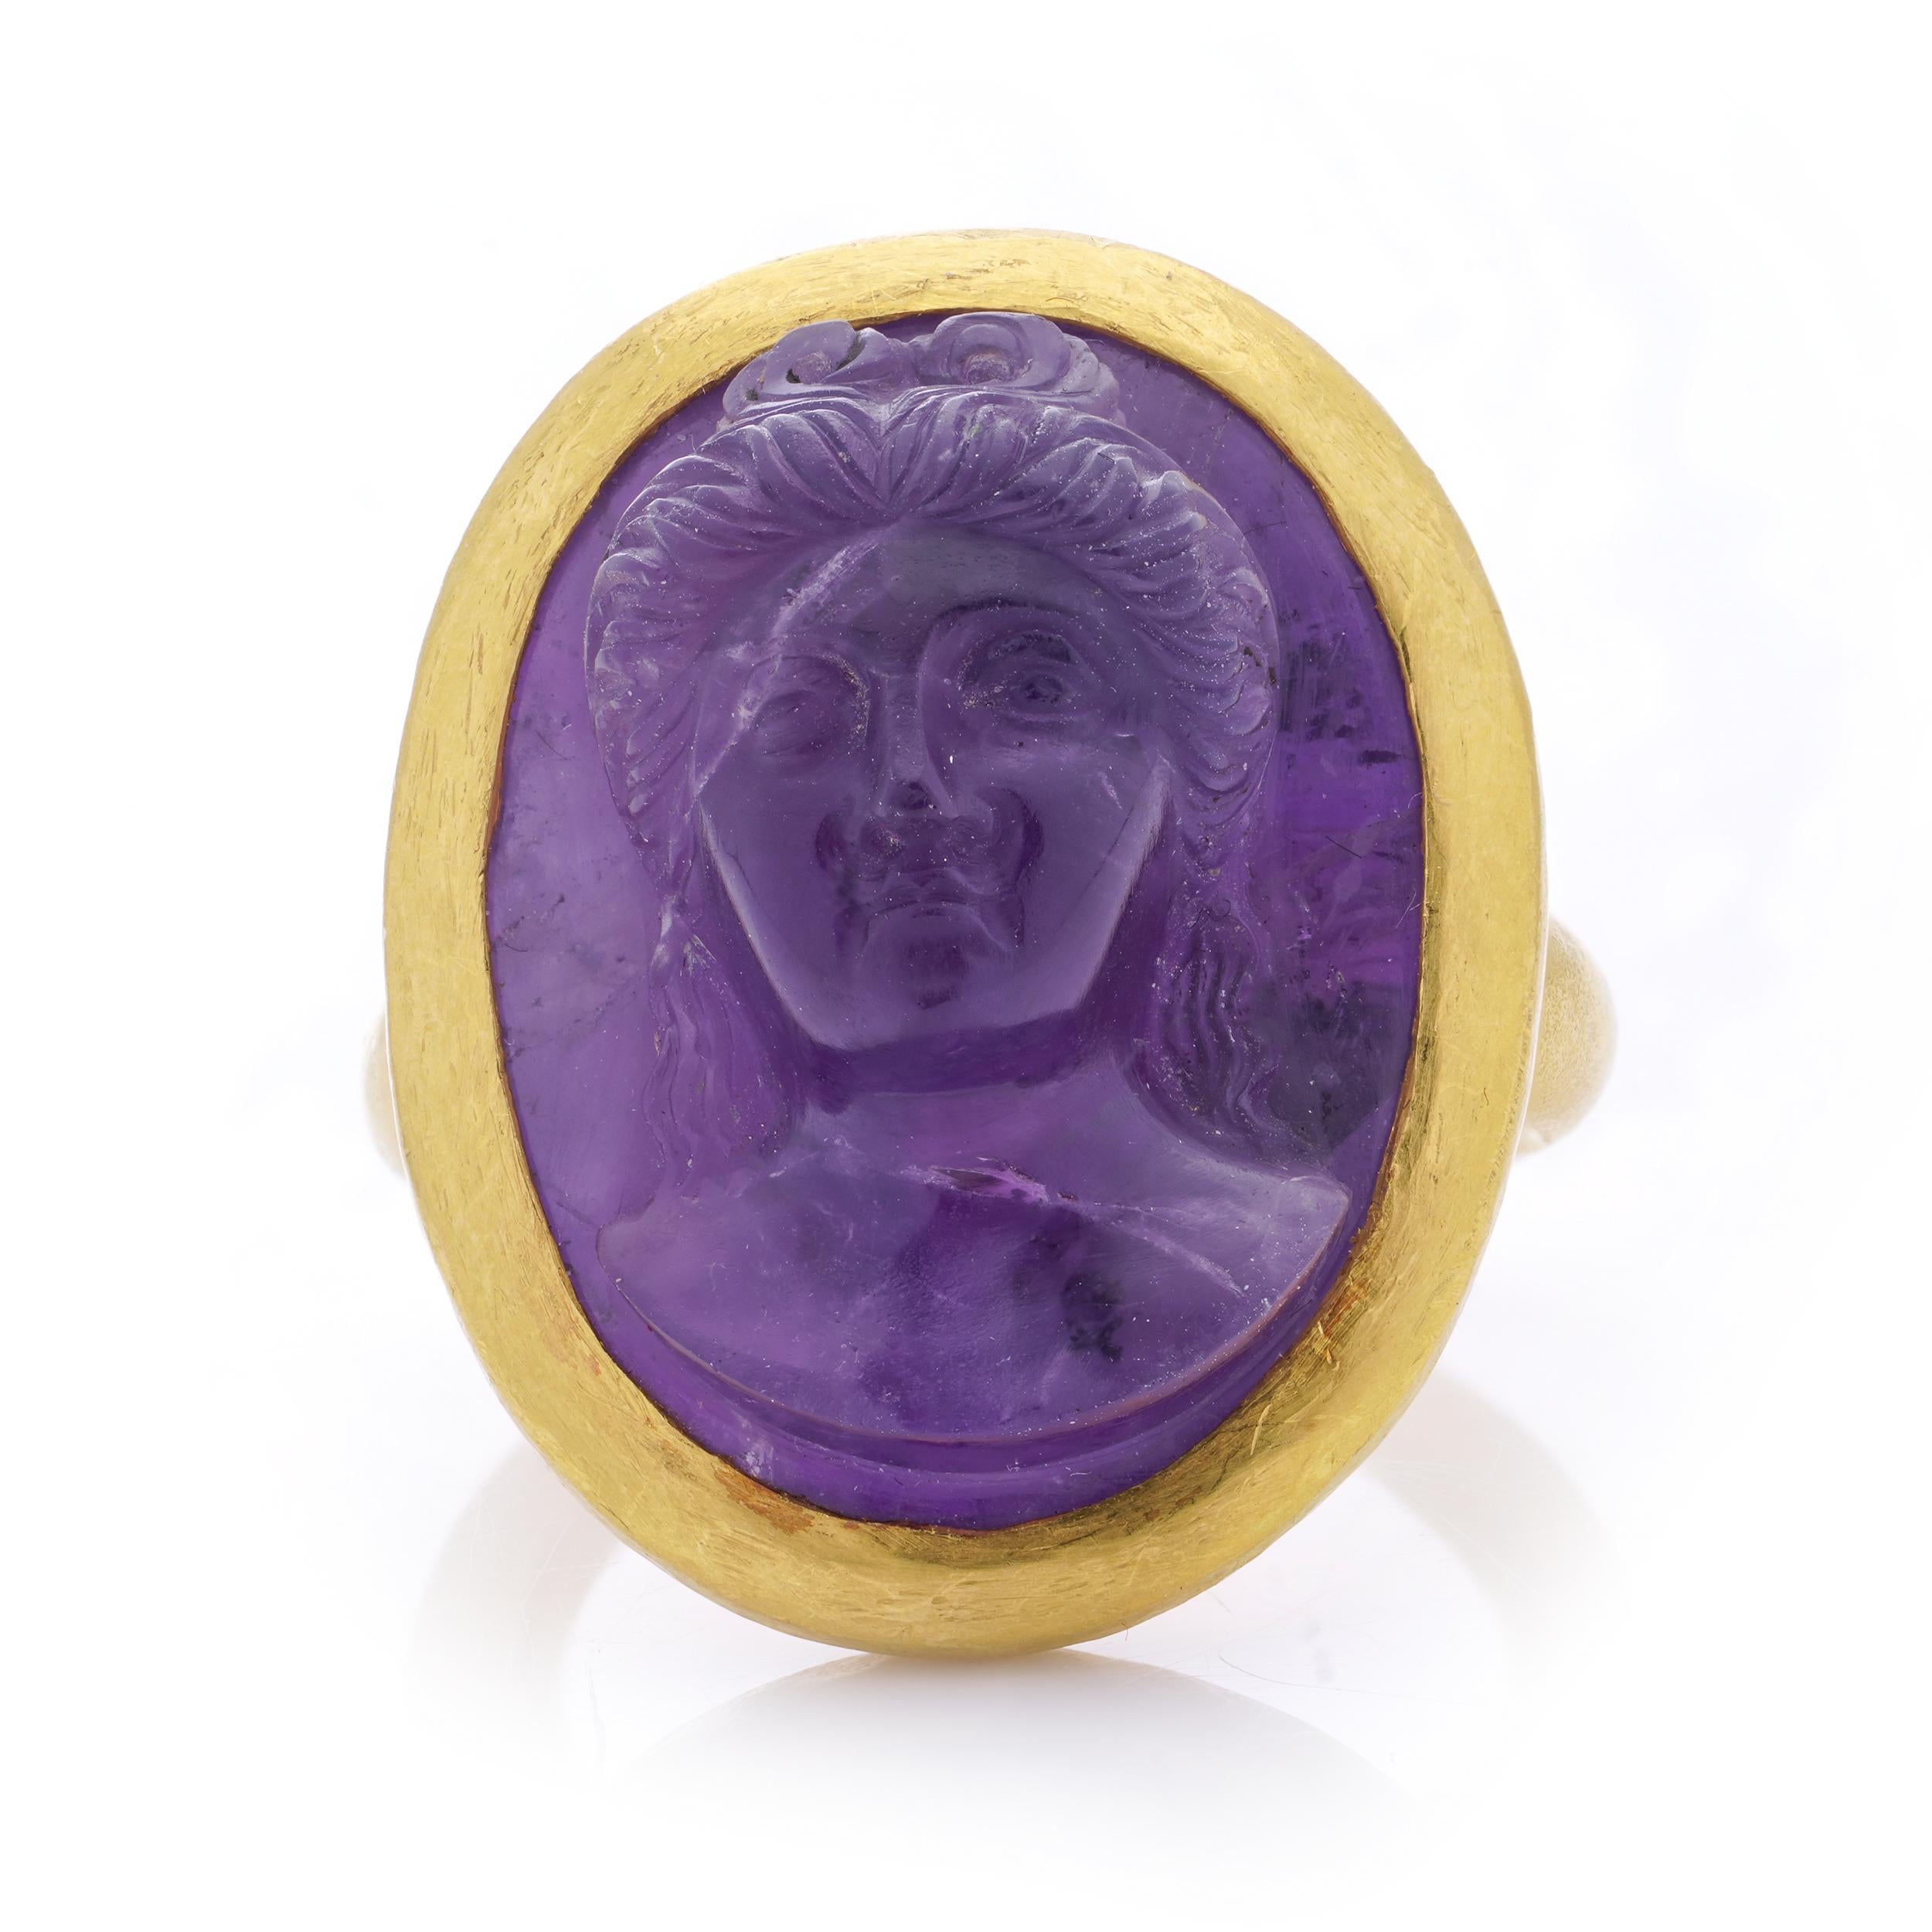  24kt. yellow gold carved amethyst intaglio ring with a woman's portrait In Good Condition For Sale In Braintree, GB